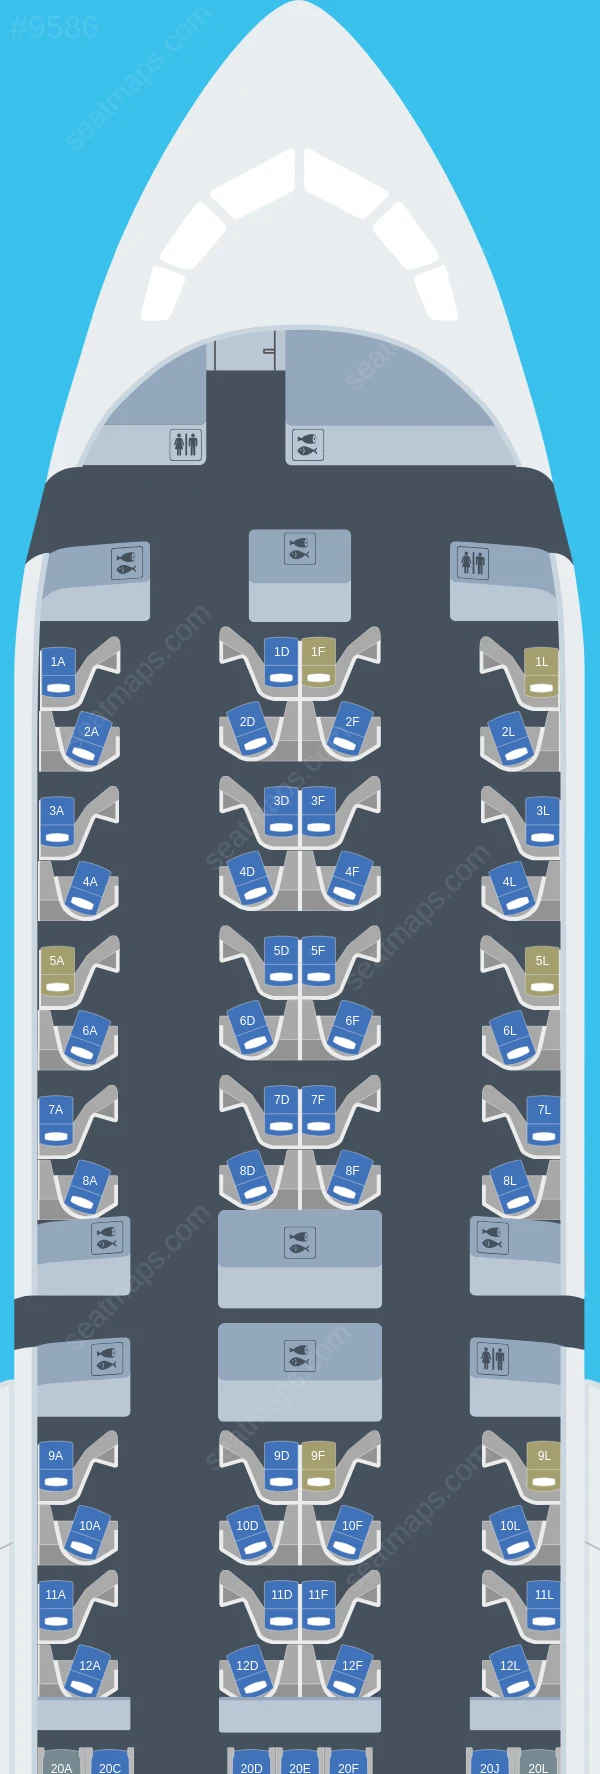 United Boeing 787-9 V.1 seatmap preview